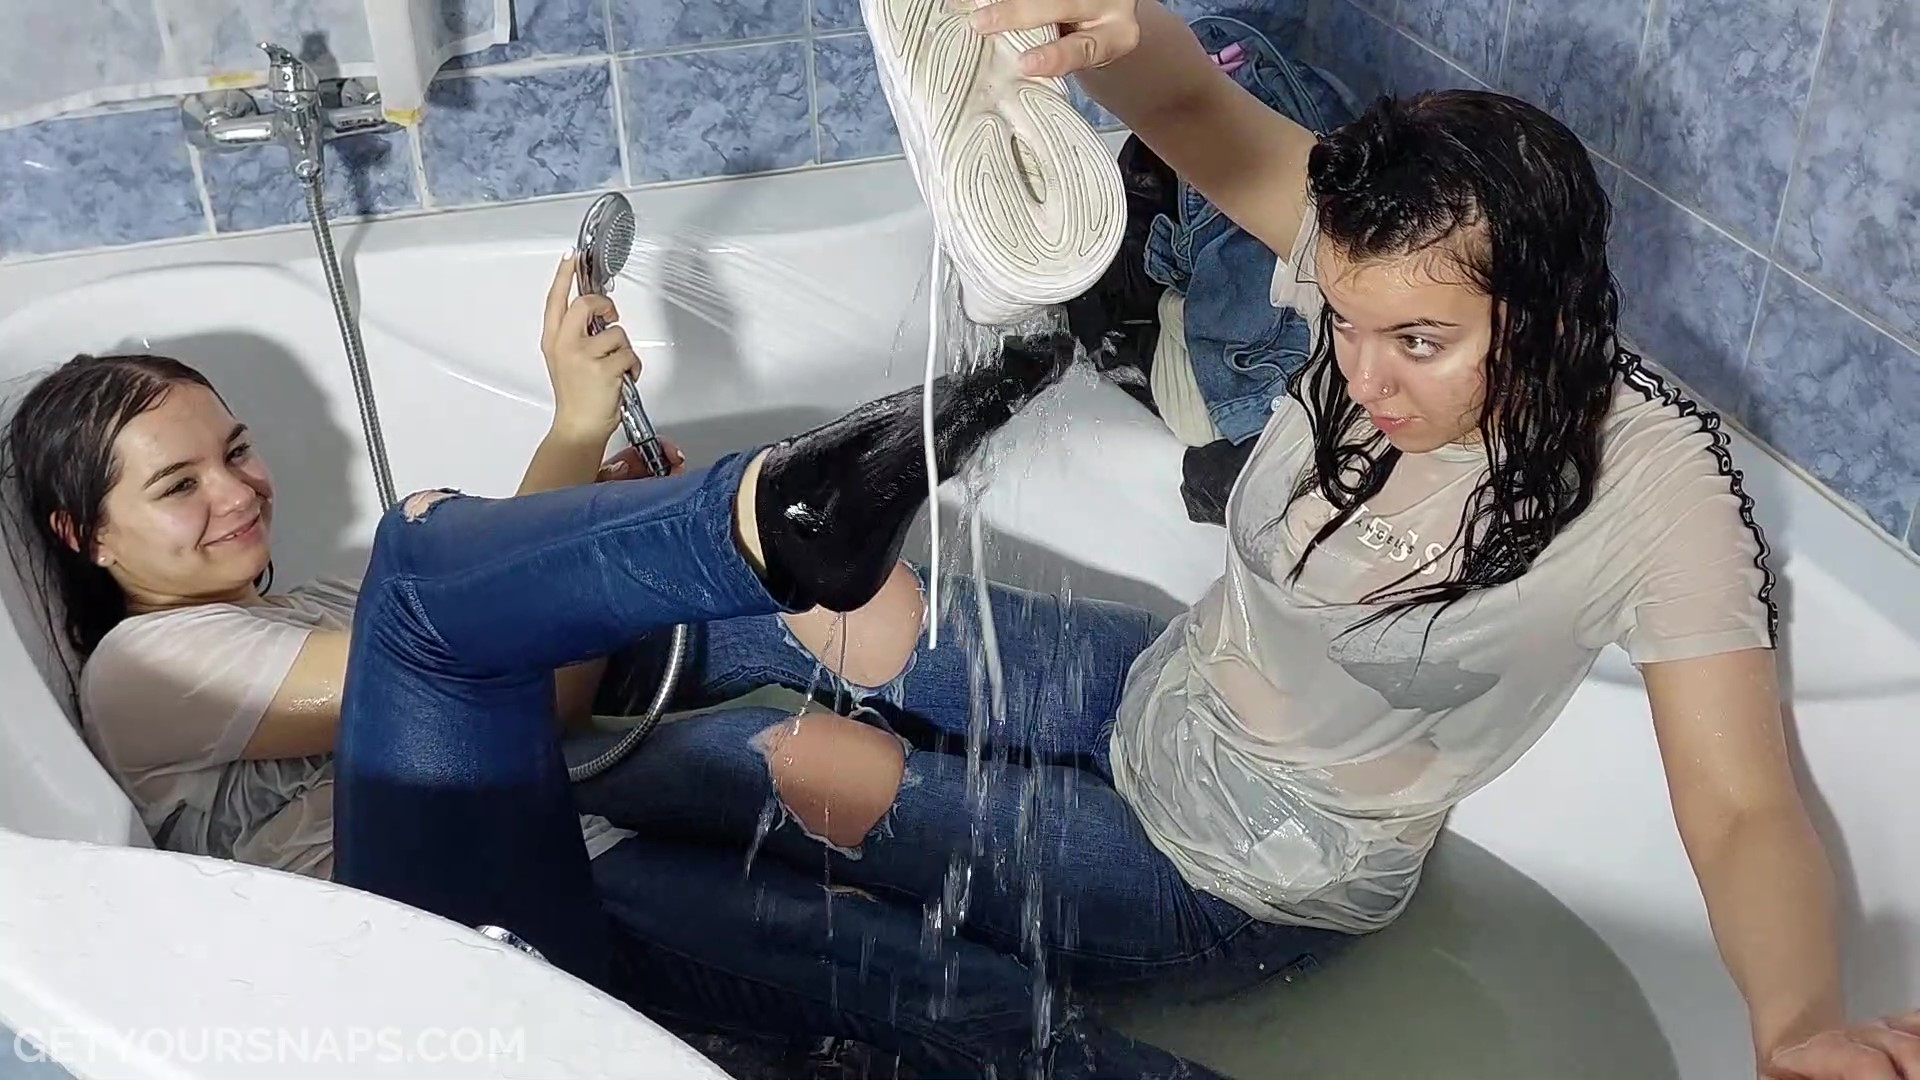 Kyra and Lara gets wet in jeans - frame at 7m59s